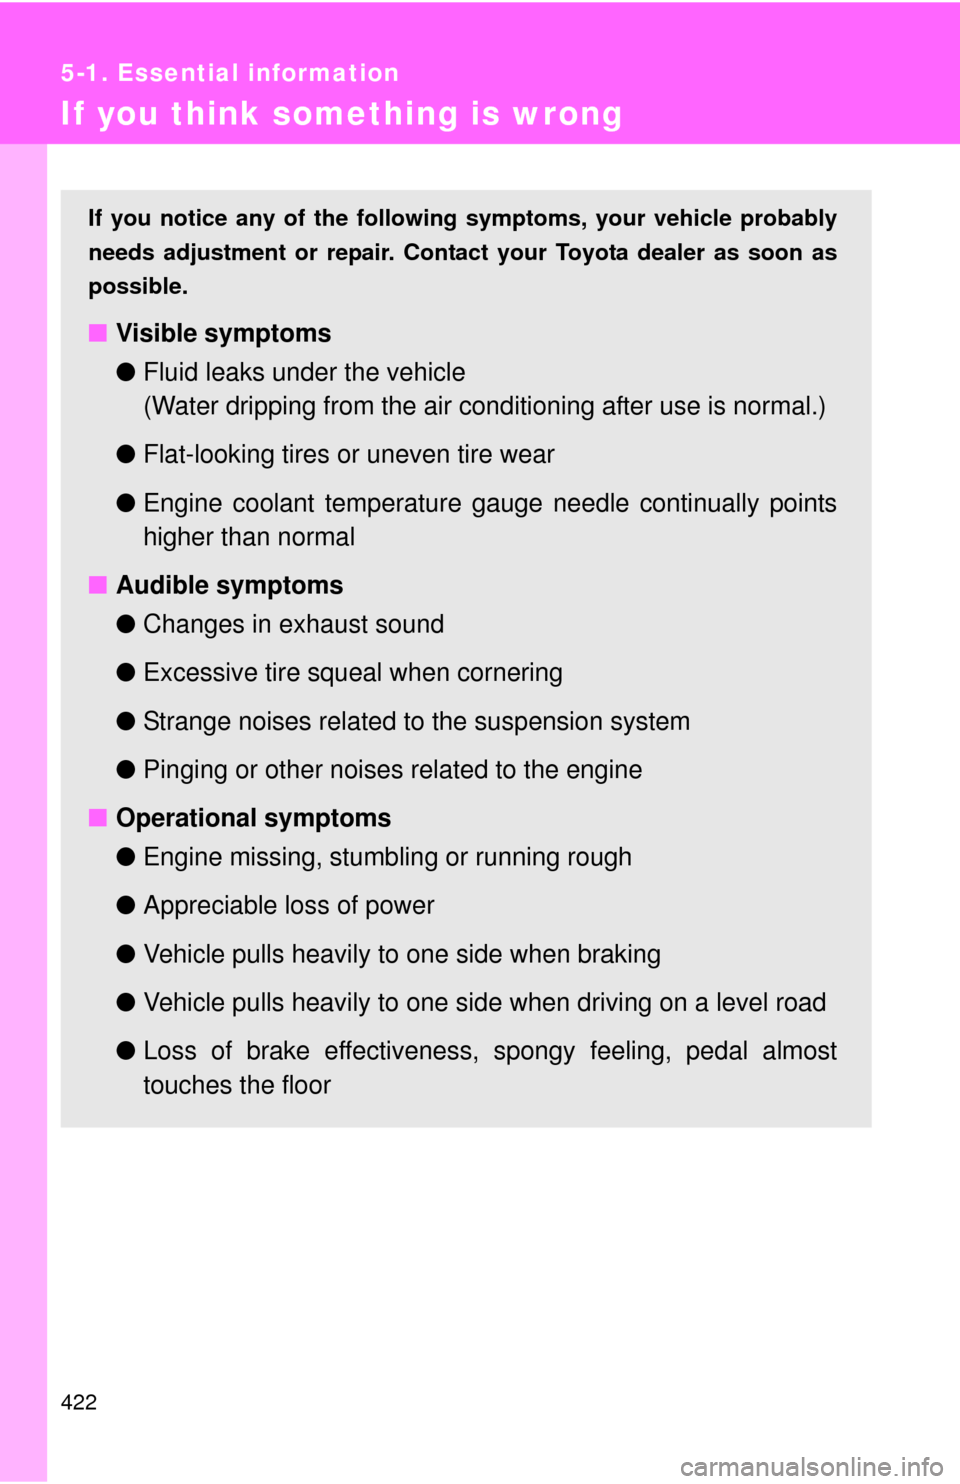 TOYOTA COROLLA 2013 11.G Owners Manual 422
5-1. Essential information
If you think something is wrong
If you notice any of the following symptoms, your vehicle probably
needs adjustment or repair. Contact your Toyota dealer as soon as
poss